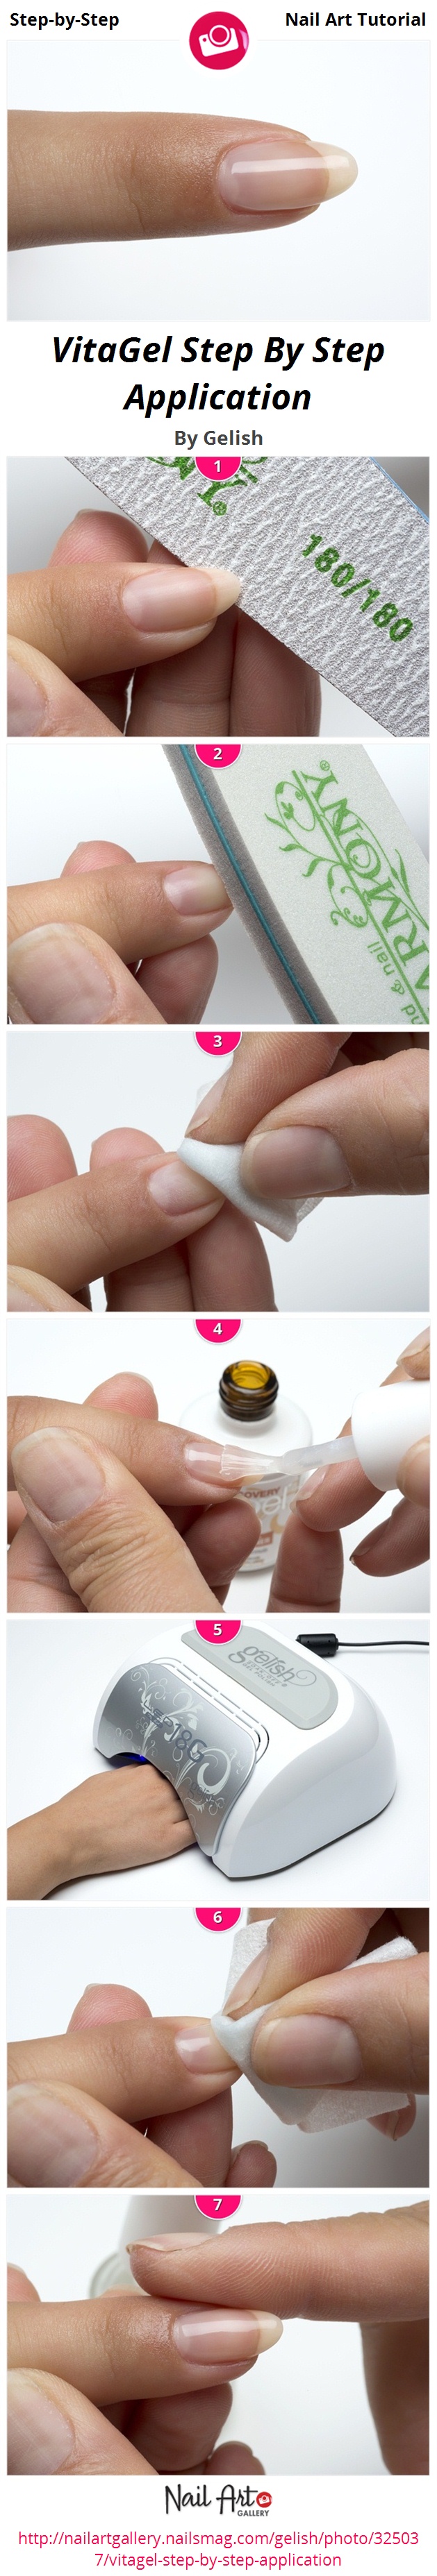 VitaGel Step By Step Application - Nail Art Gallery